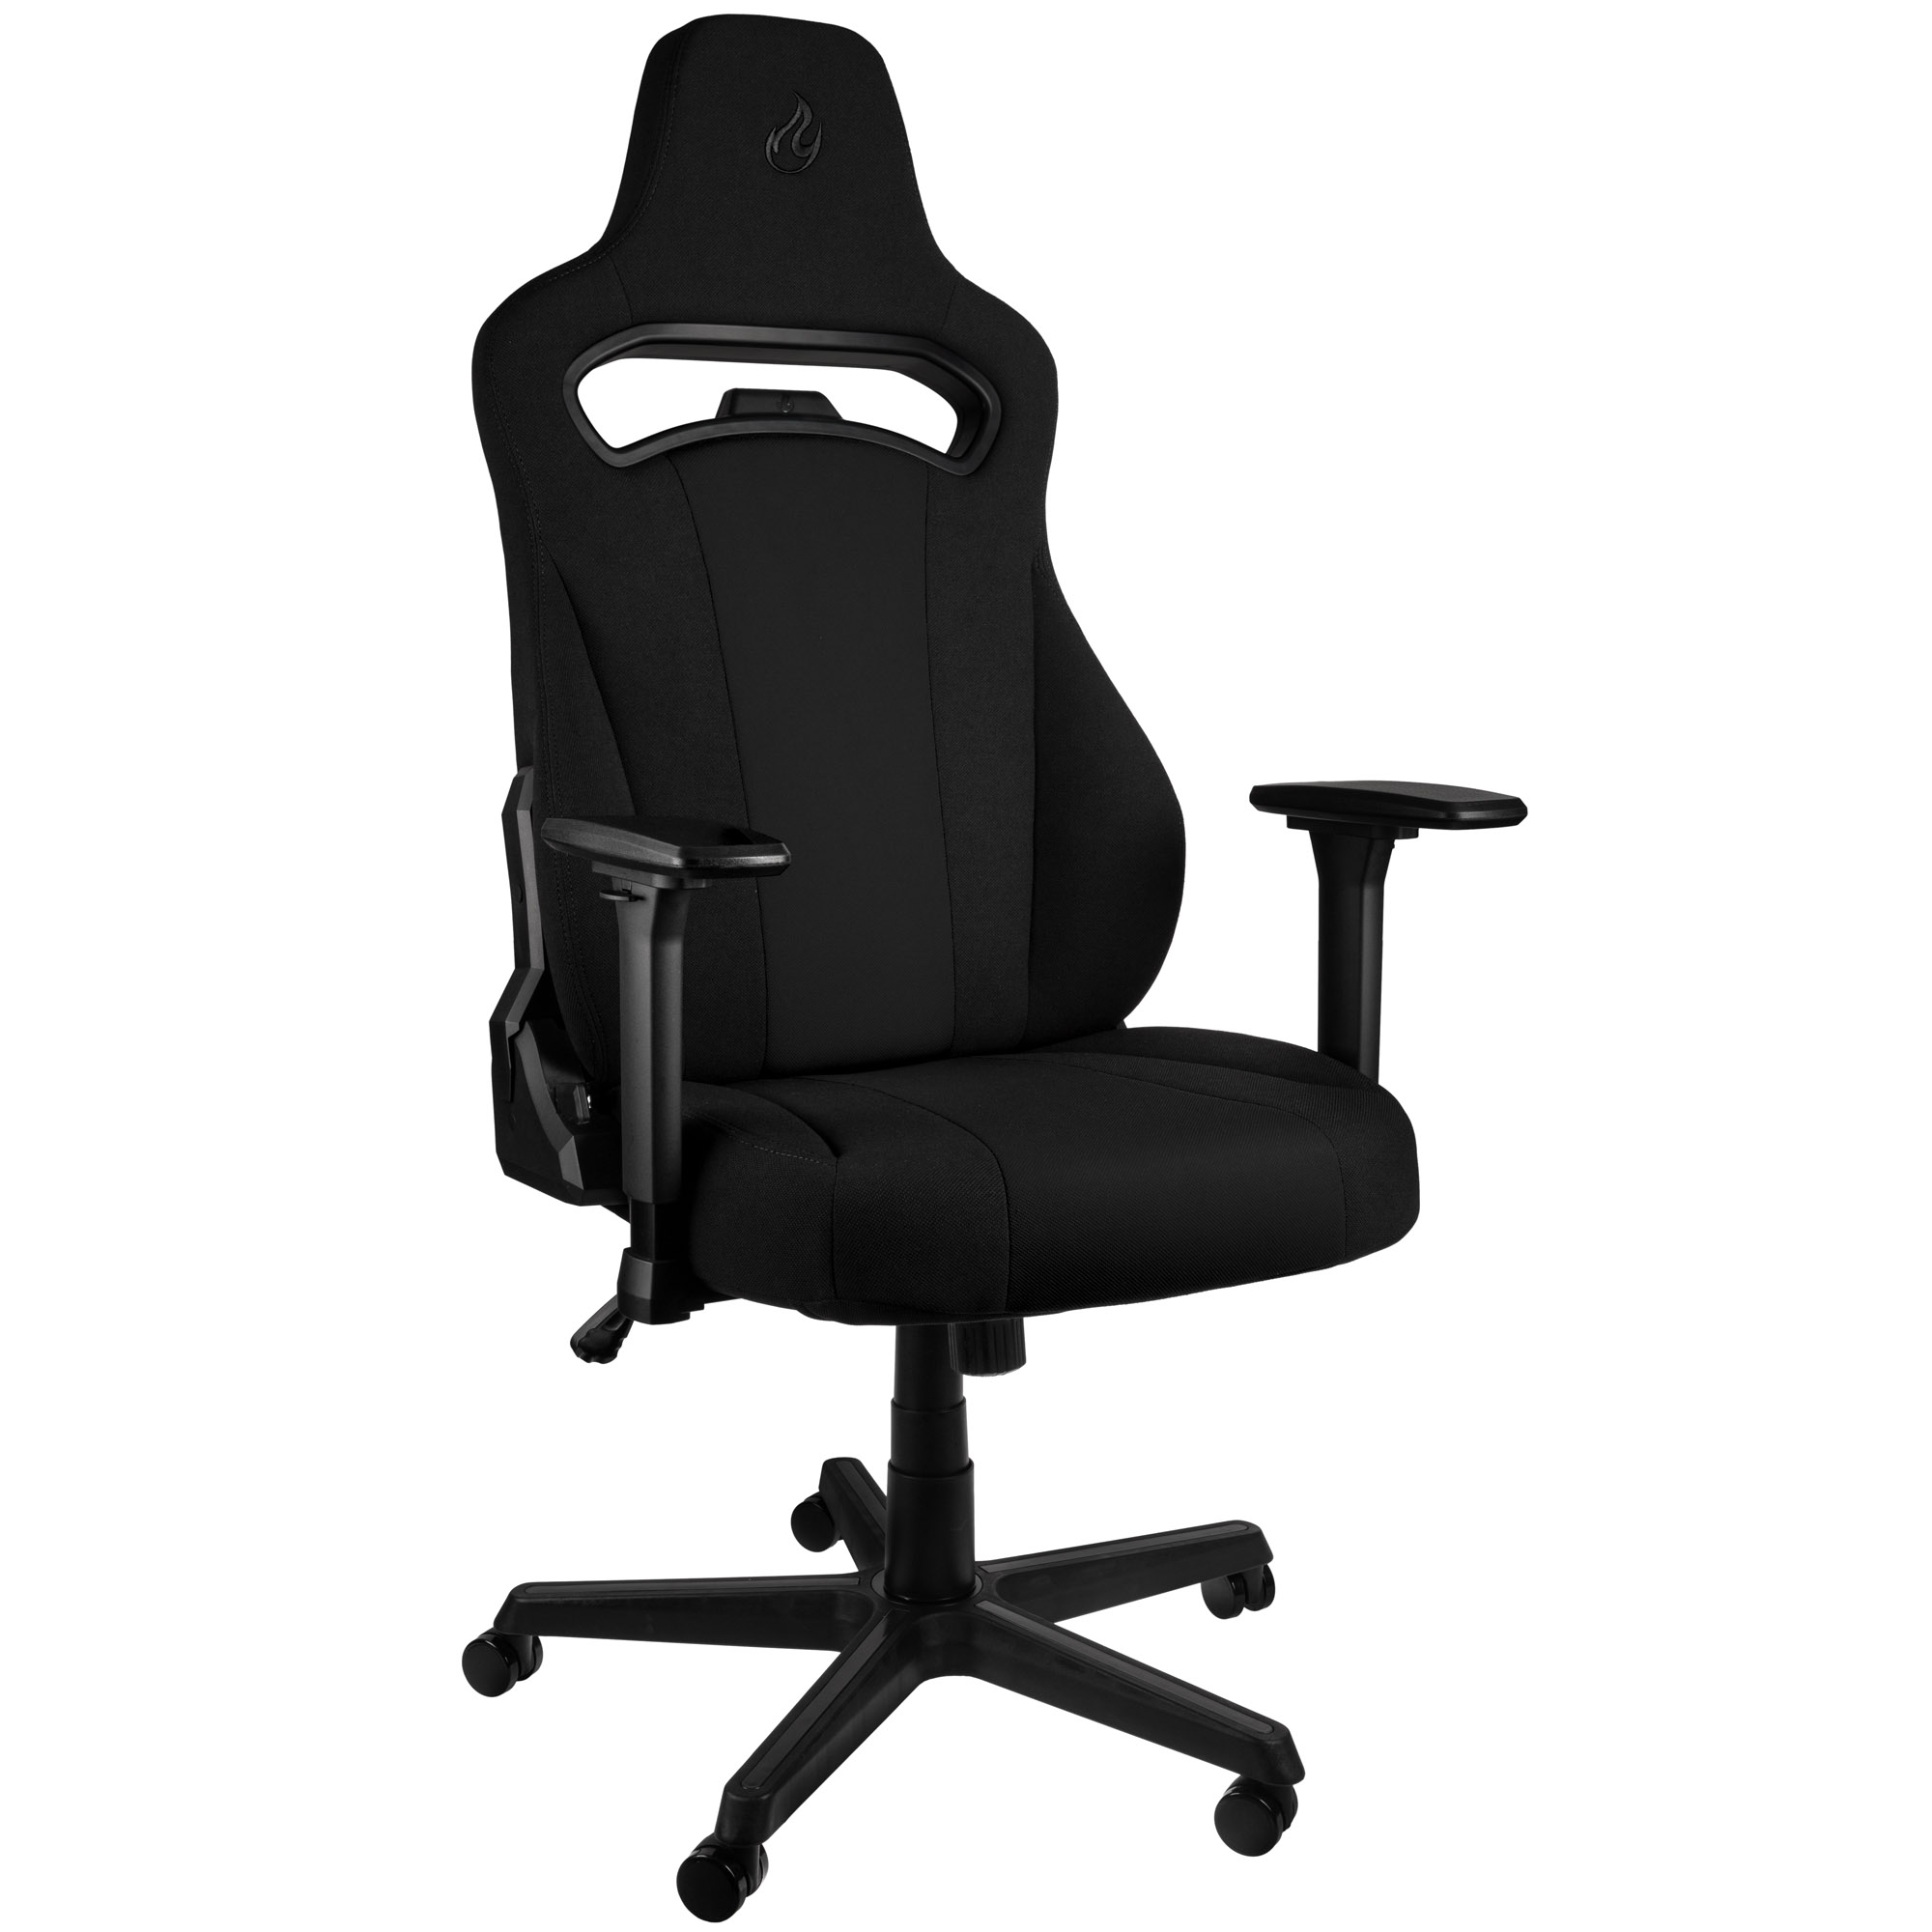 E250 Gaming Chairs